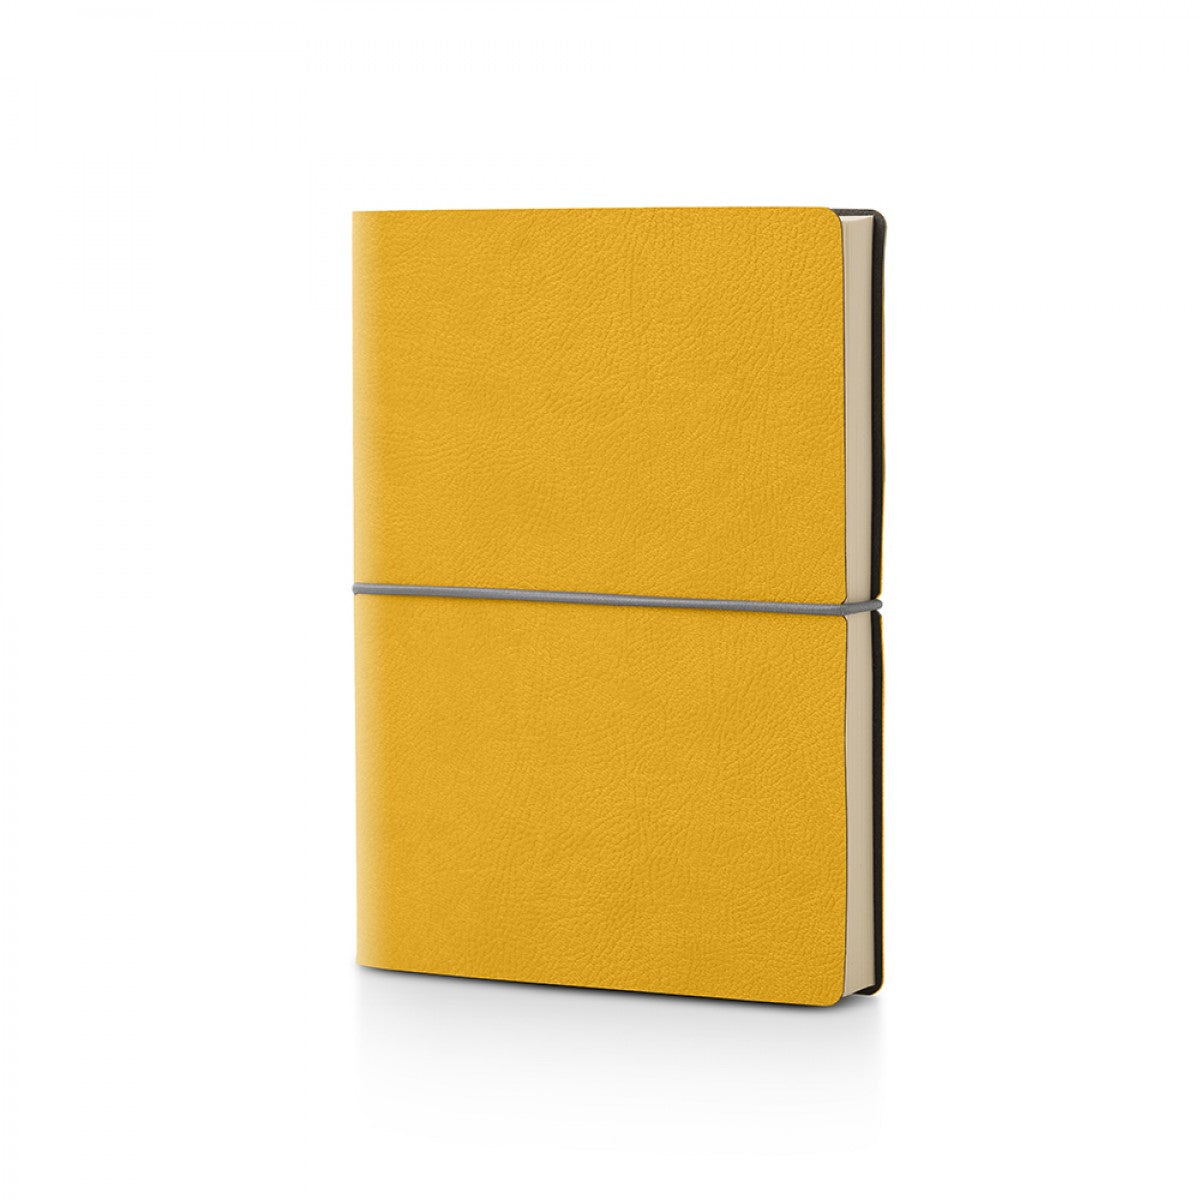 Ciak Smartbook Note Book Yellow 5" by 7"